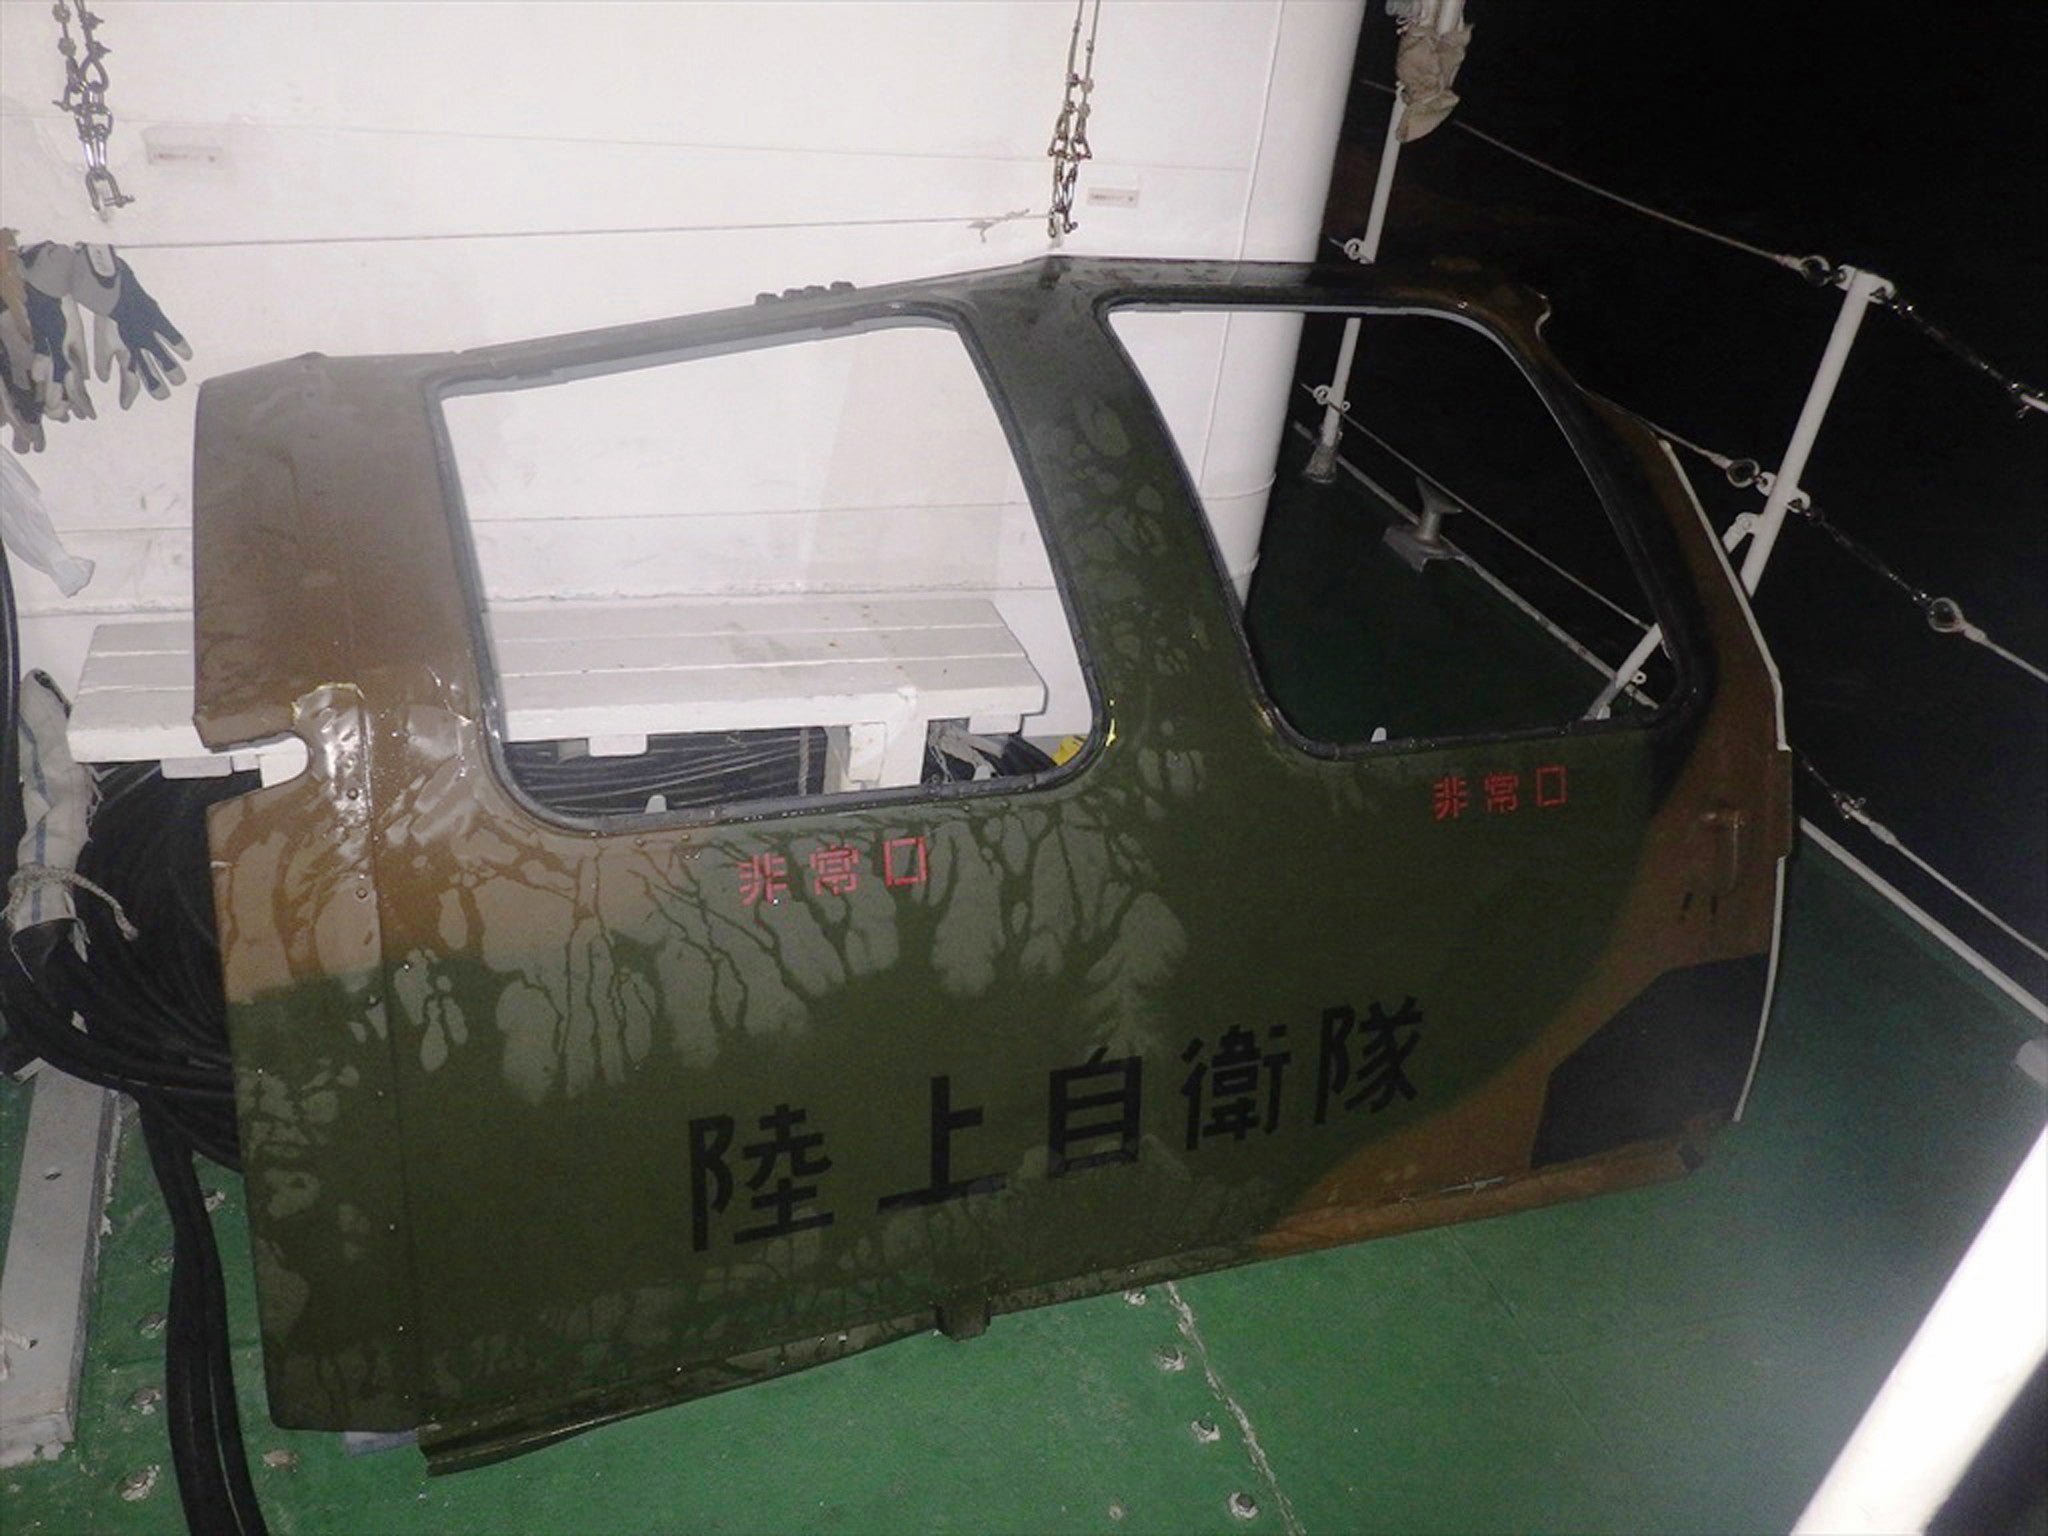 A part believed to be that of the missing helicopter in the sea off Miyako Island, Okinawa Prefecture, southwestern Japan